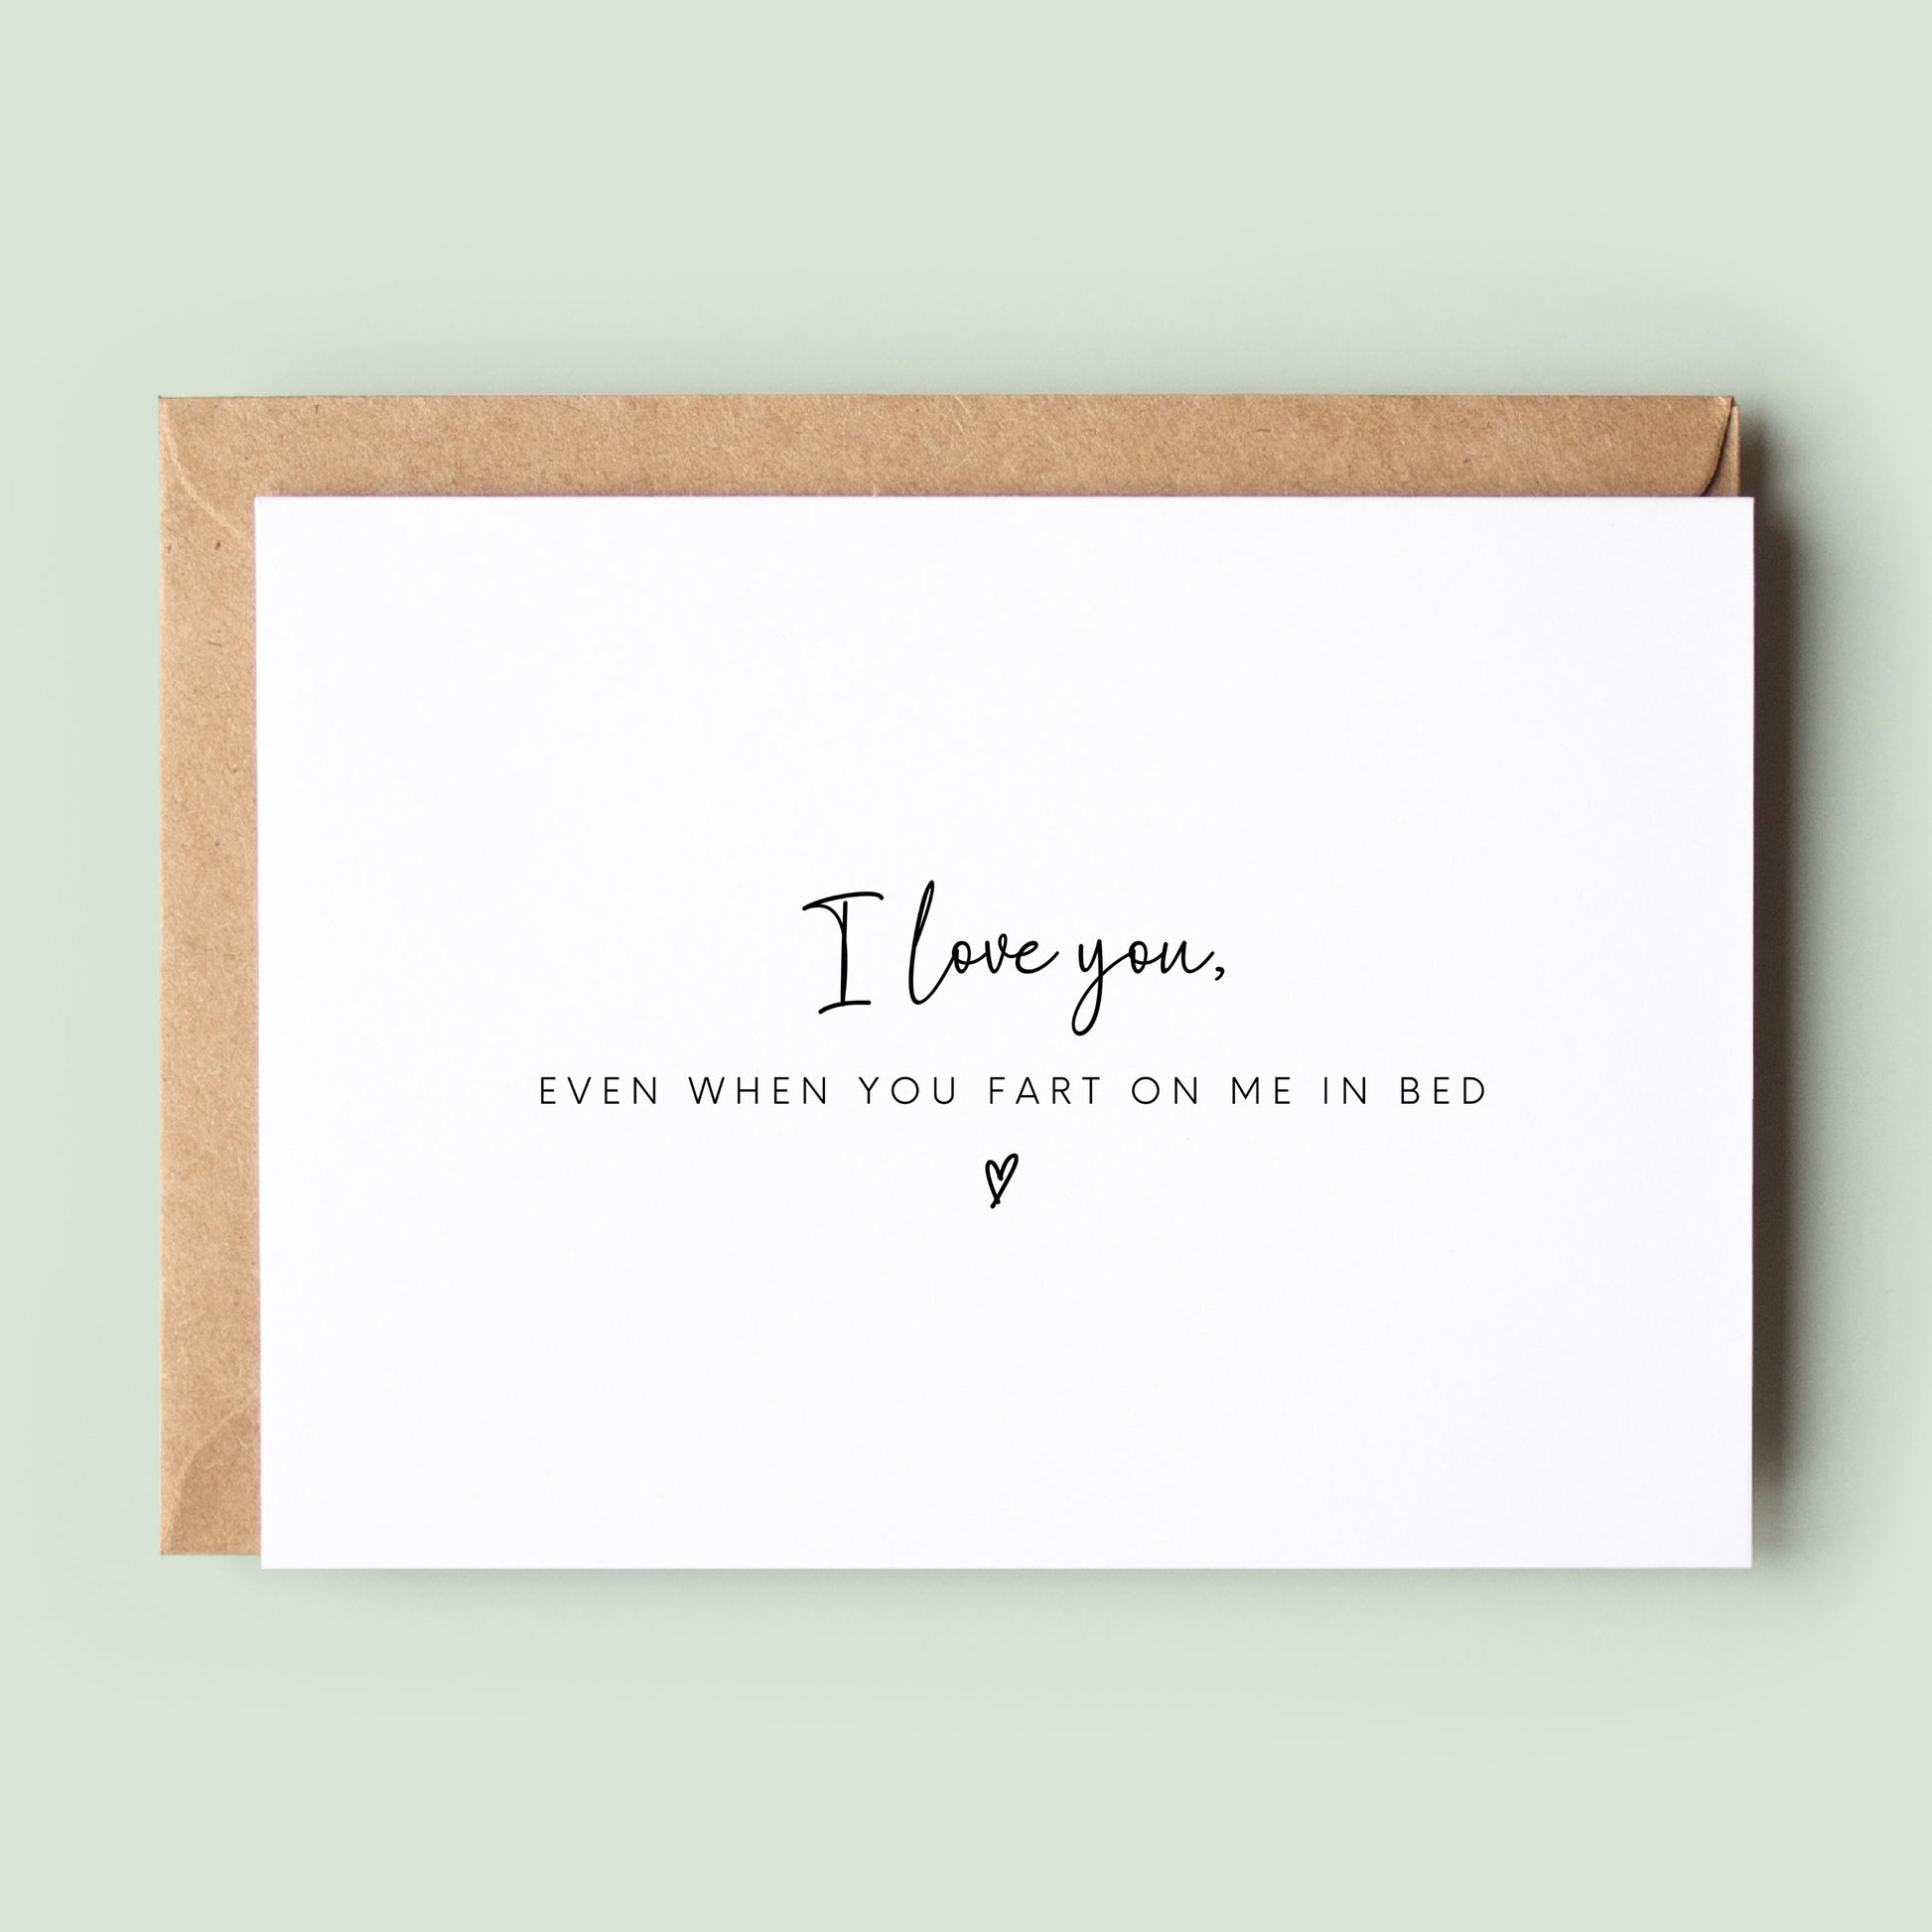 Funny Fart On Me In Bed Card - Funny I Love You Card - Funny Husband Card - Funny Boyfriend Card - Anniversary Card - Valentines Card #106